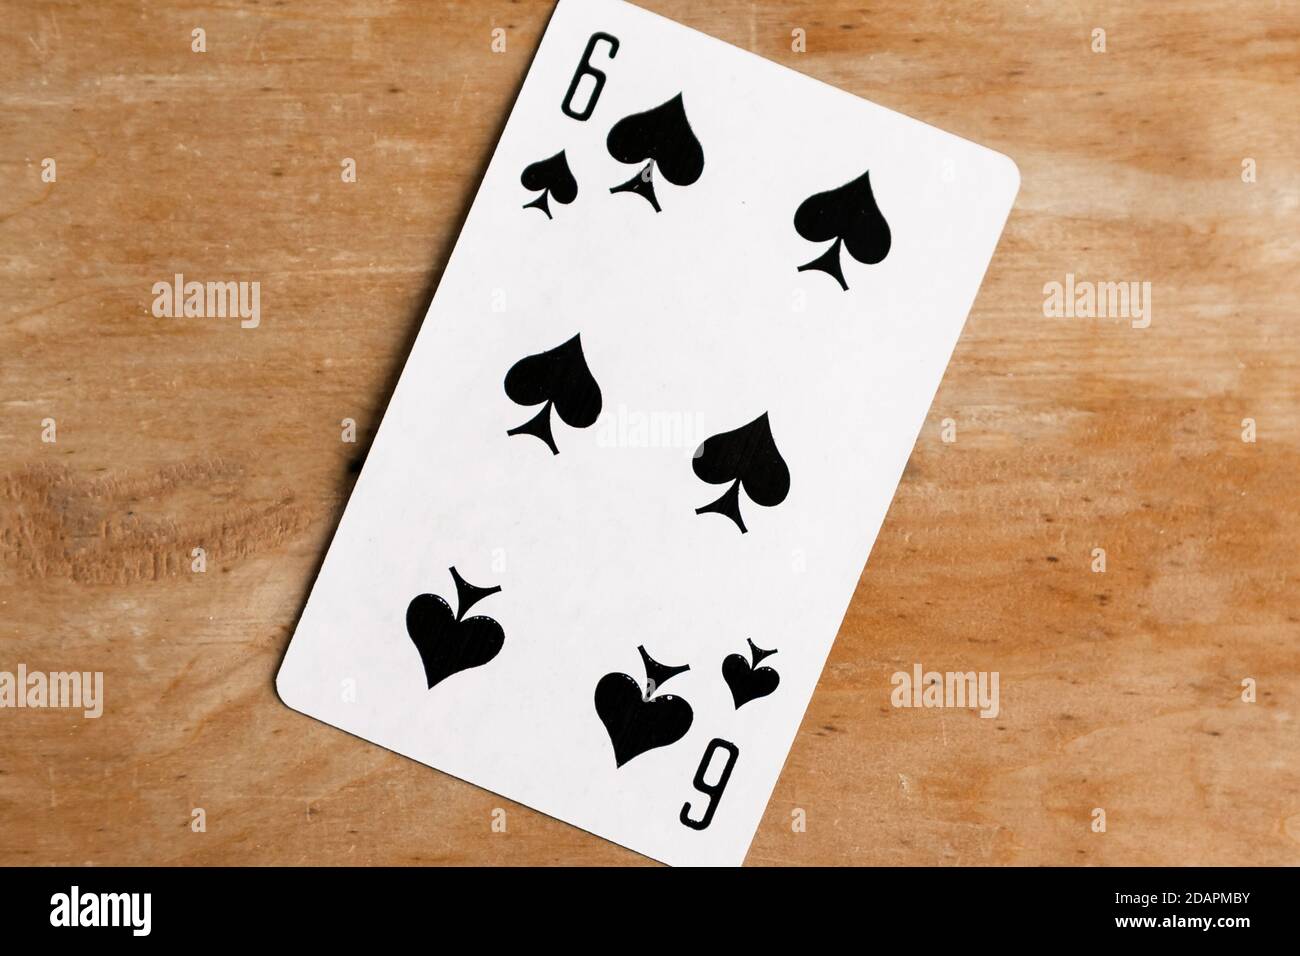 Six of Spades playing card, wooden background. Stock Photo